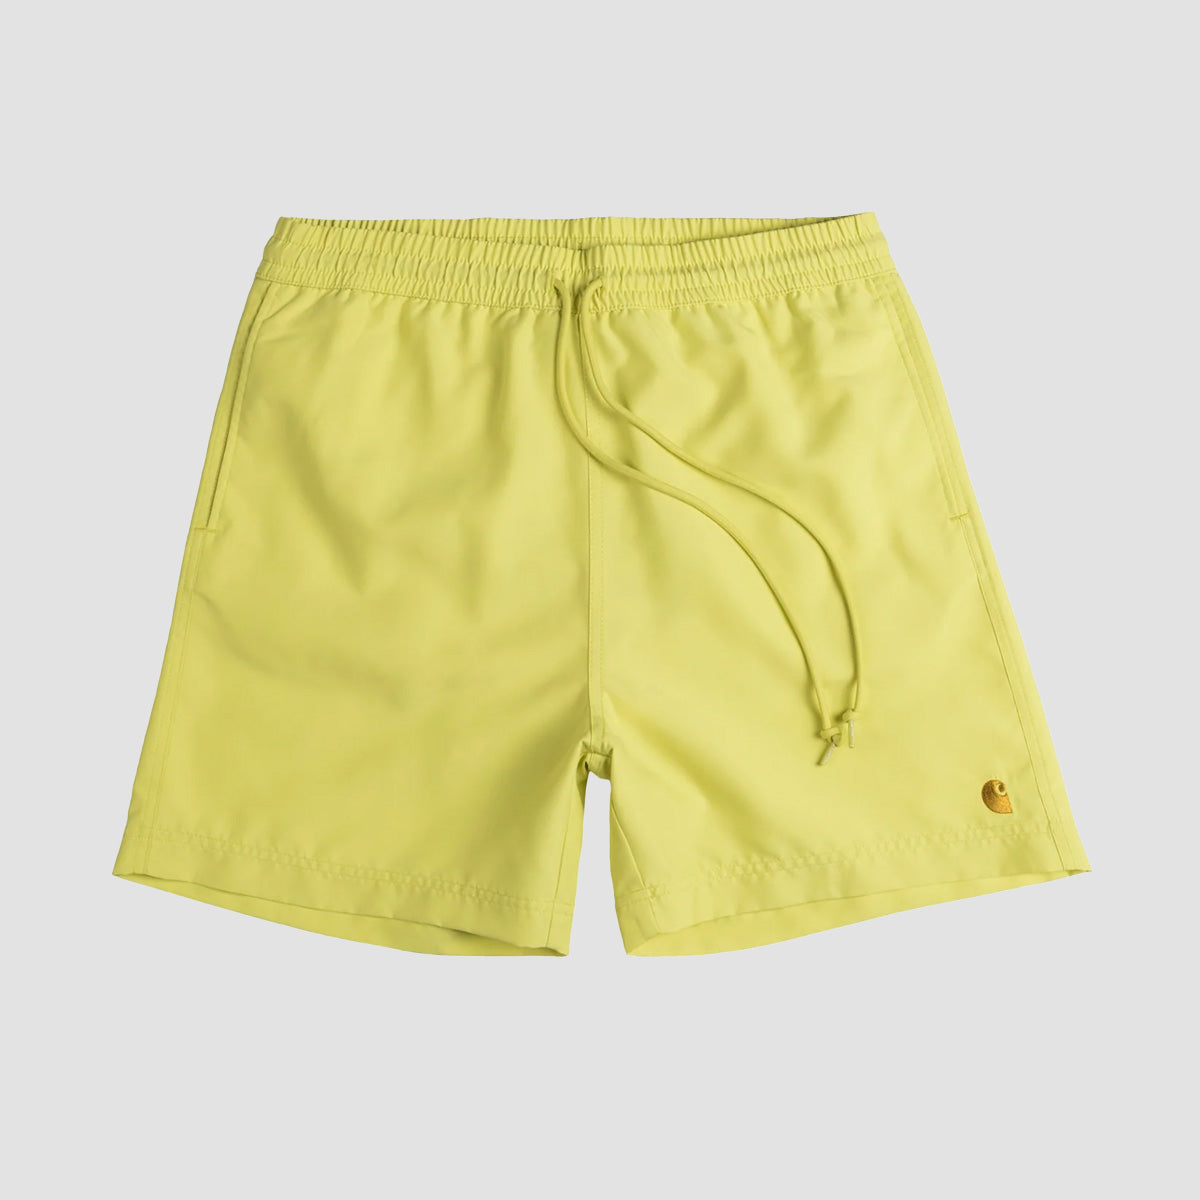 Carhartt WIP Chase Swim Trunks Arctic Lime/Gold